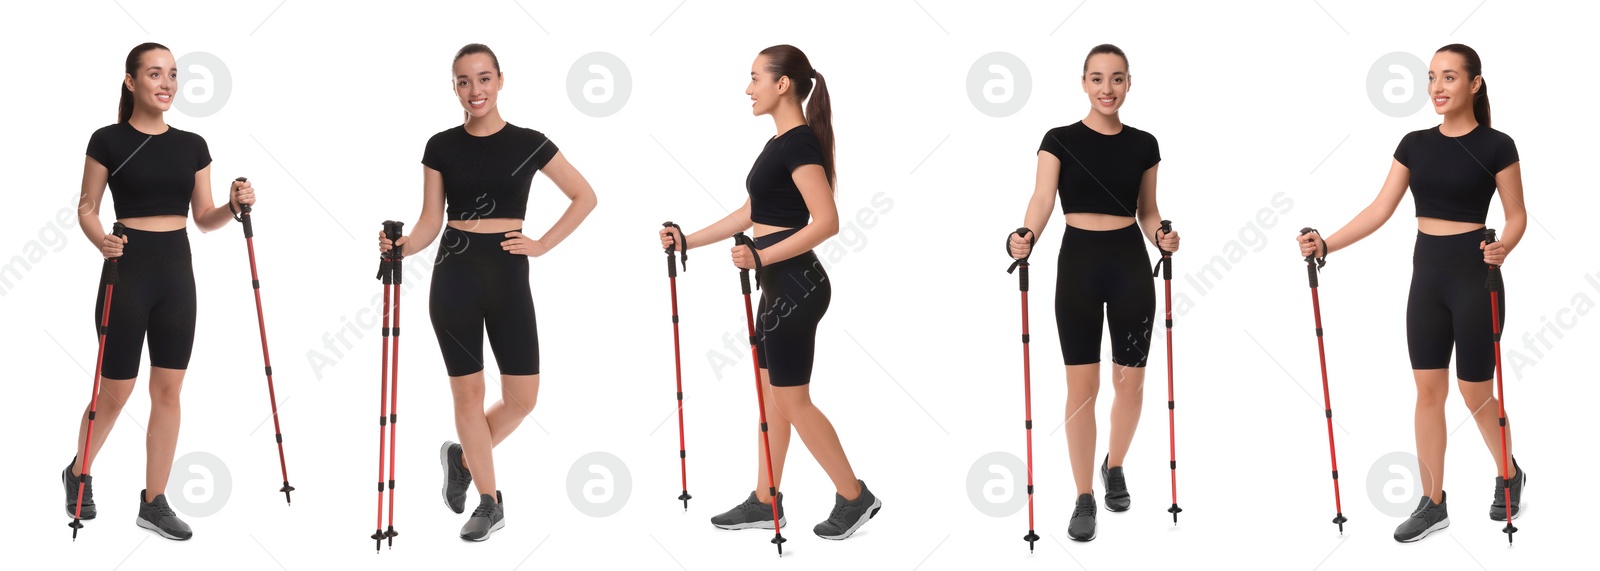 Image of Sporty woman with Nordic walking poles on white background, collage with photos